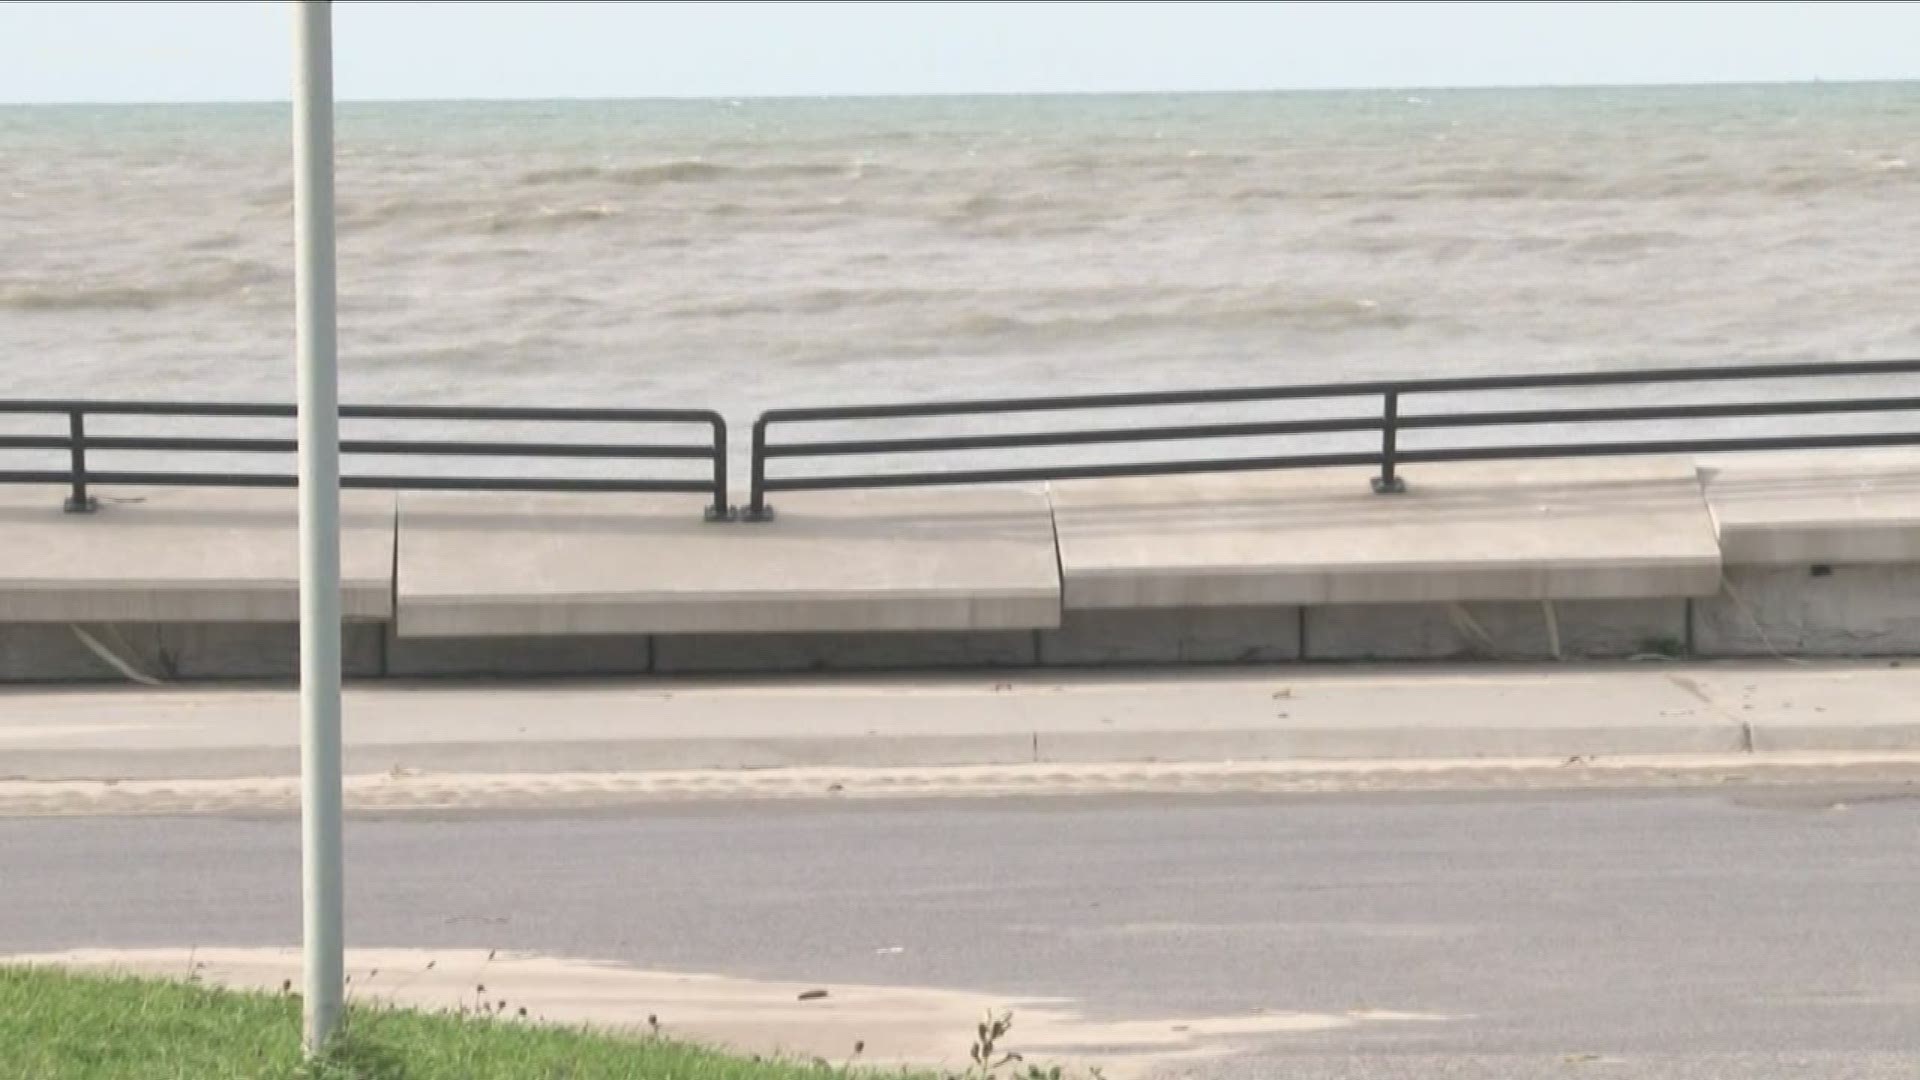 According to Dunkirk Mayor Willie Rojas, this 4000-foot brick wall along Lake Erie was built five years ago.